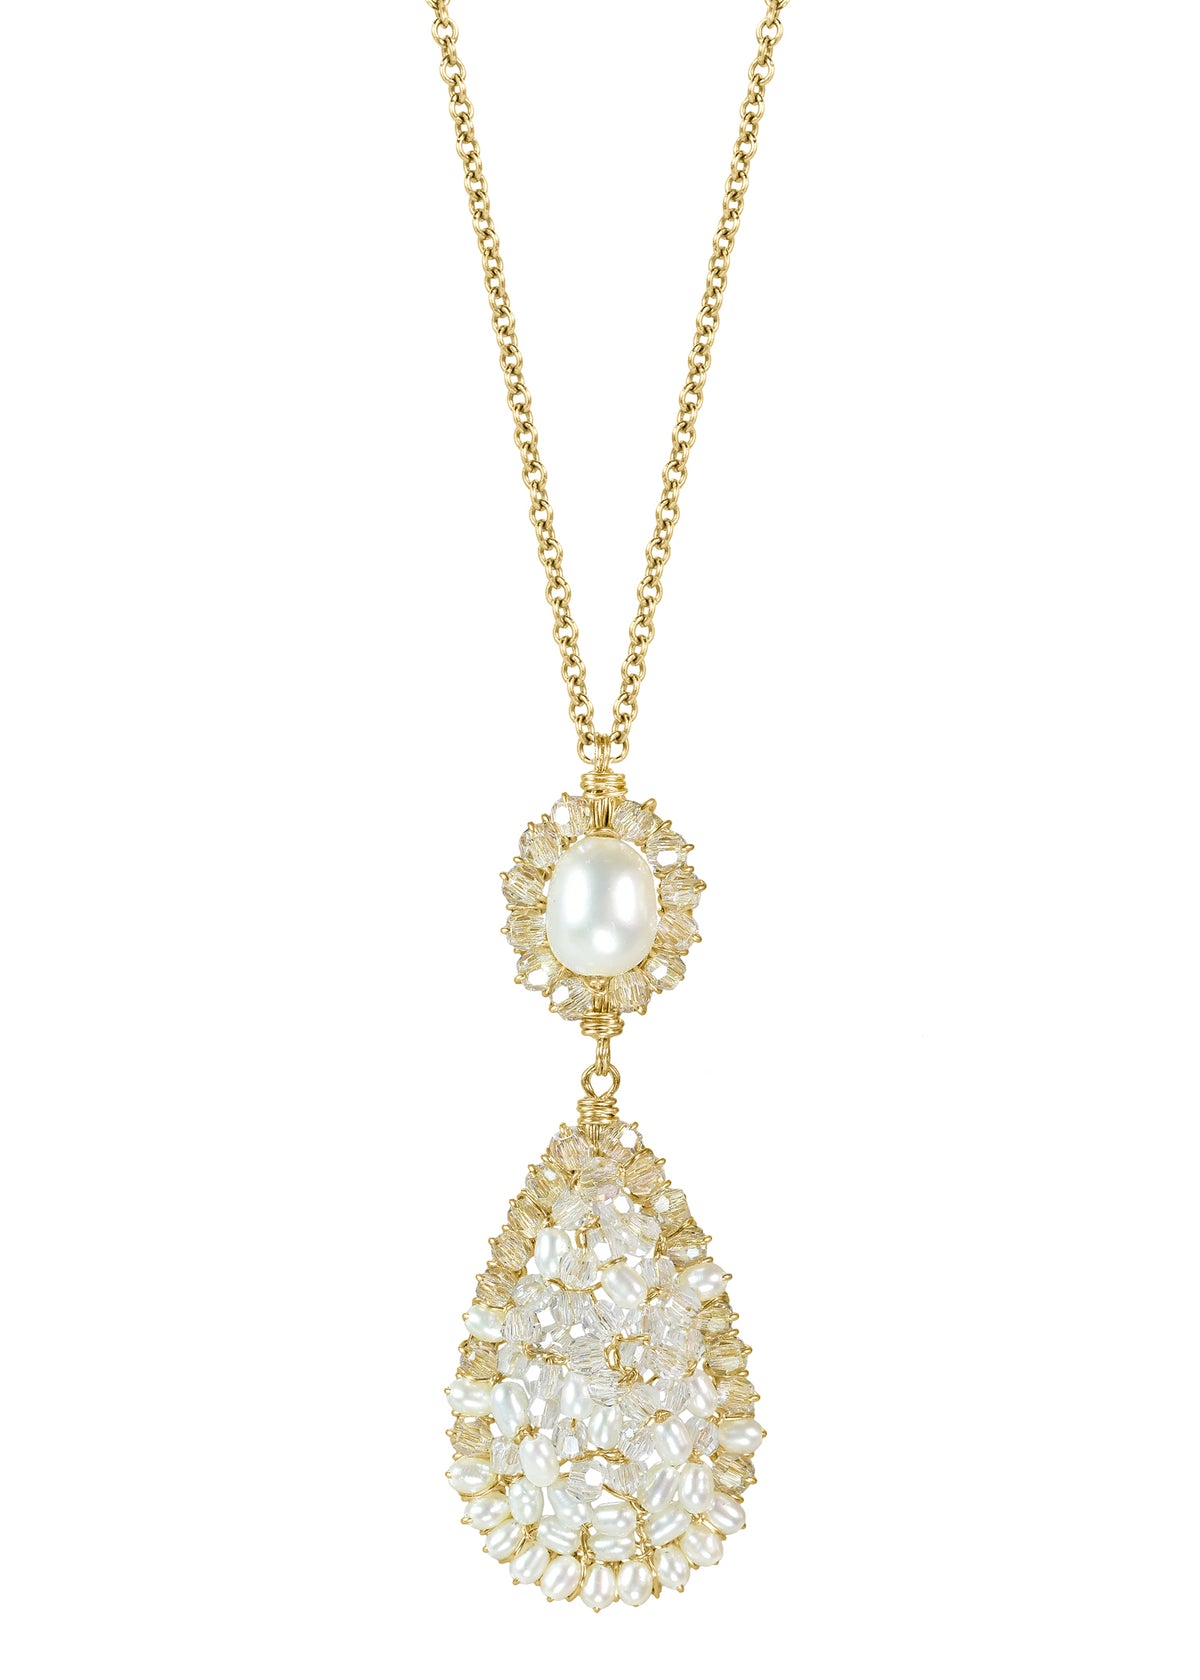 Crystal Freshwater pearl 14k gold fill Chain measures 18&quot; in length Pendant measures 1-7/16&quot; in length and 9/16&quot; in width at the widest point Handmade in our Los Angeles studio